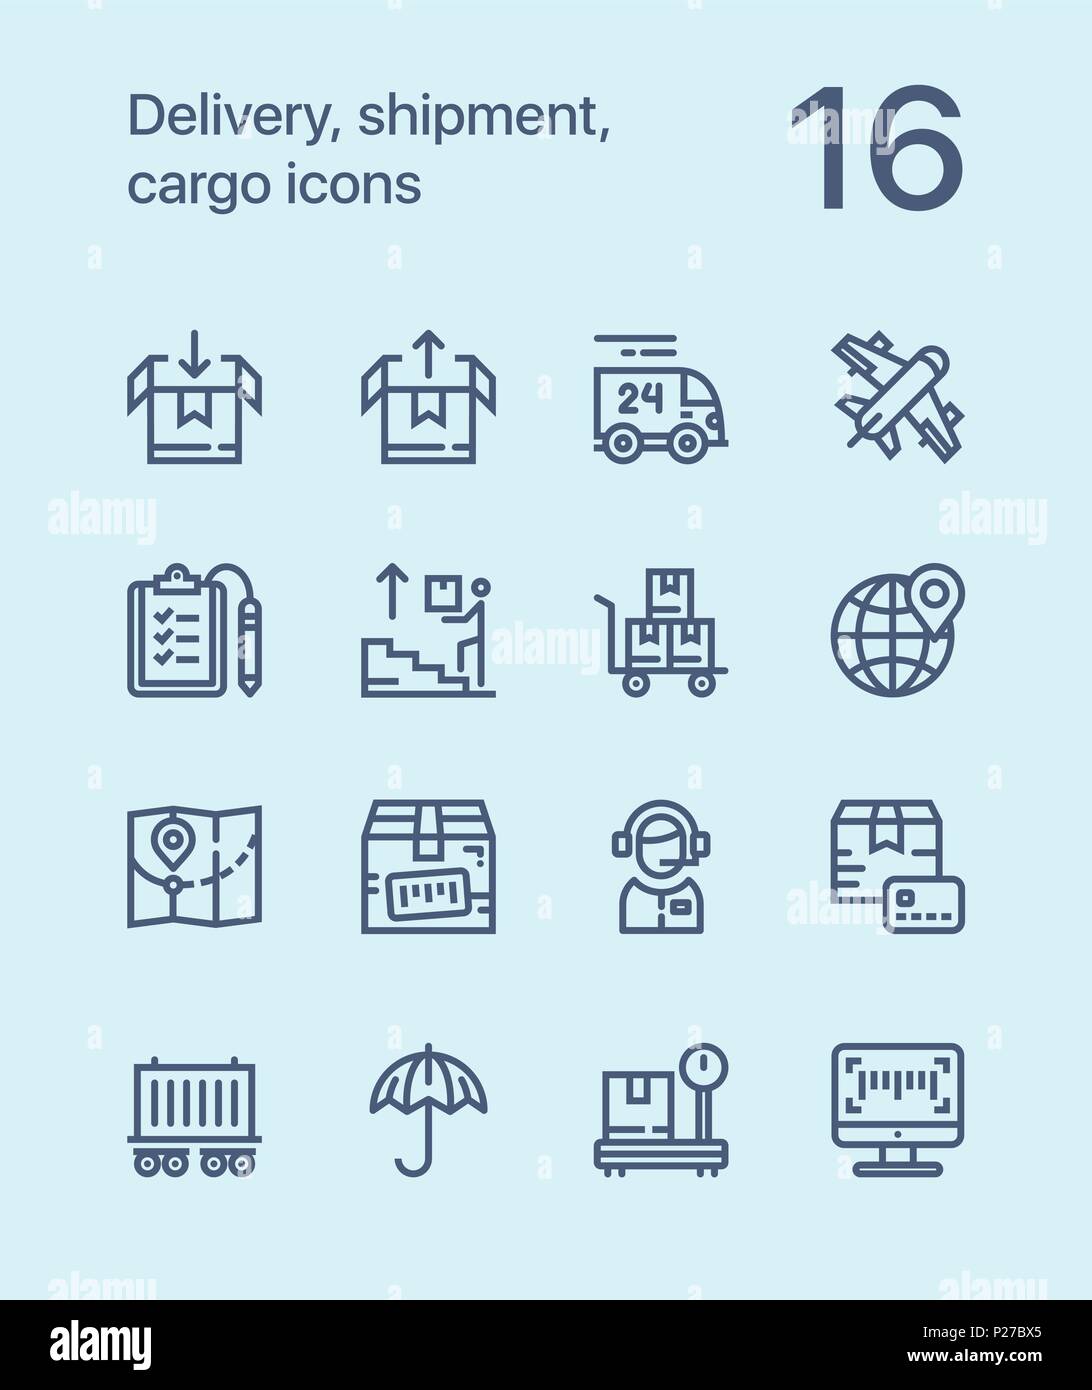 Outline Delivery, shipment, cargo icons for web and mobile design pack 2 Stock Vector